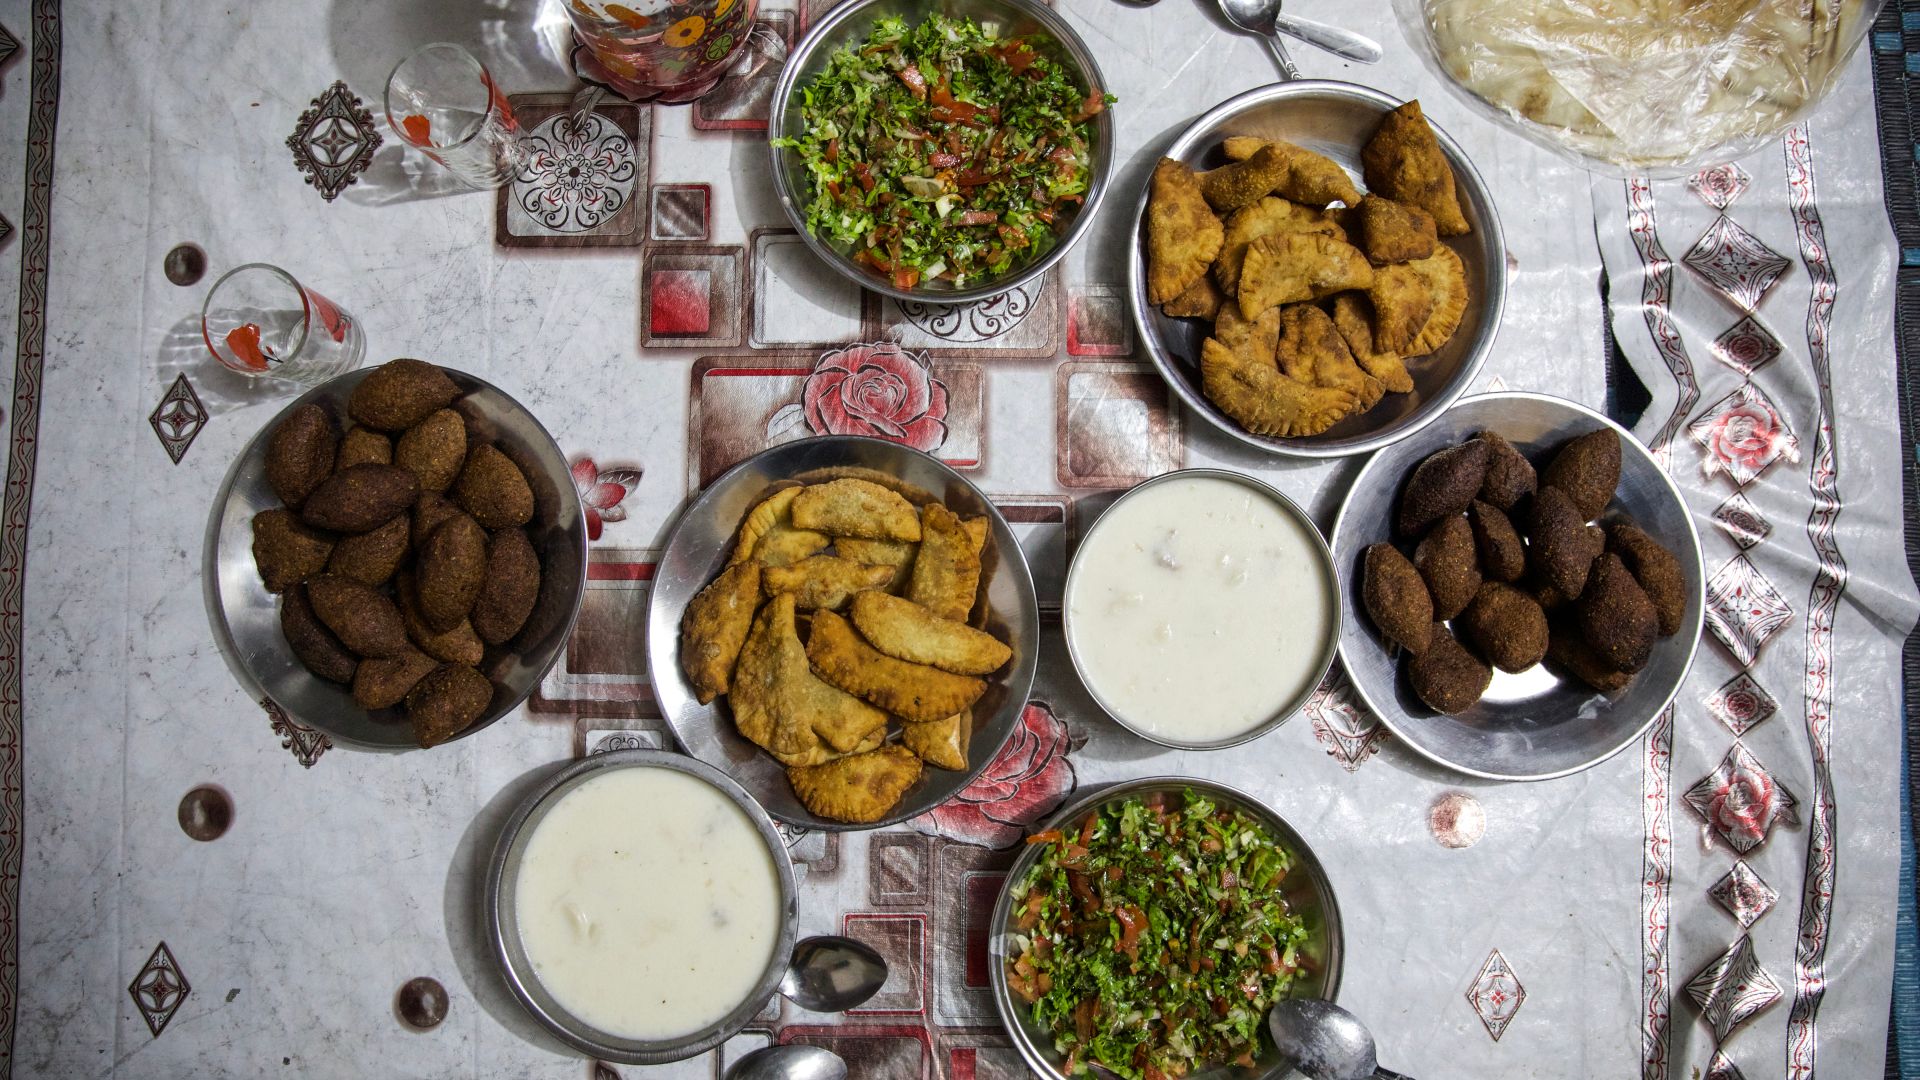 Overhead view of the food laid out on a tablecloth on the floor